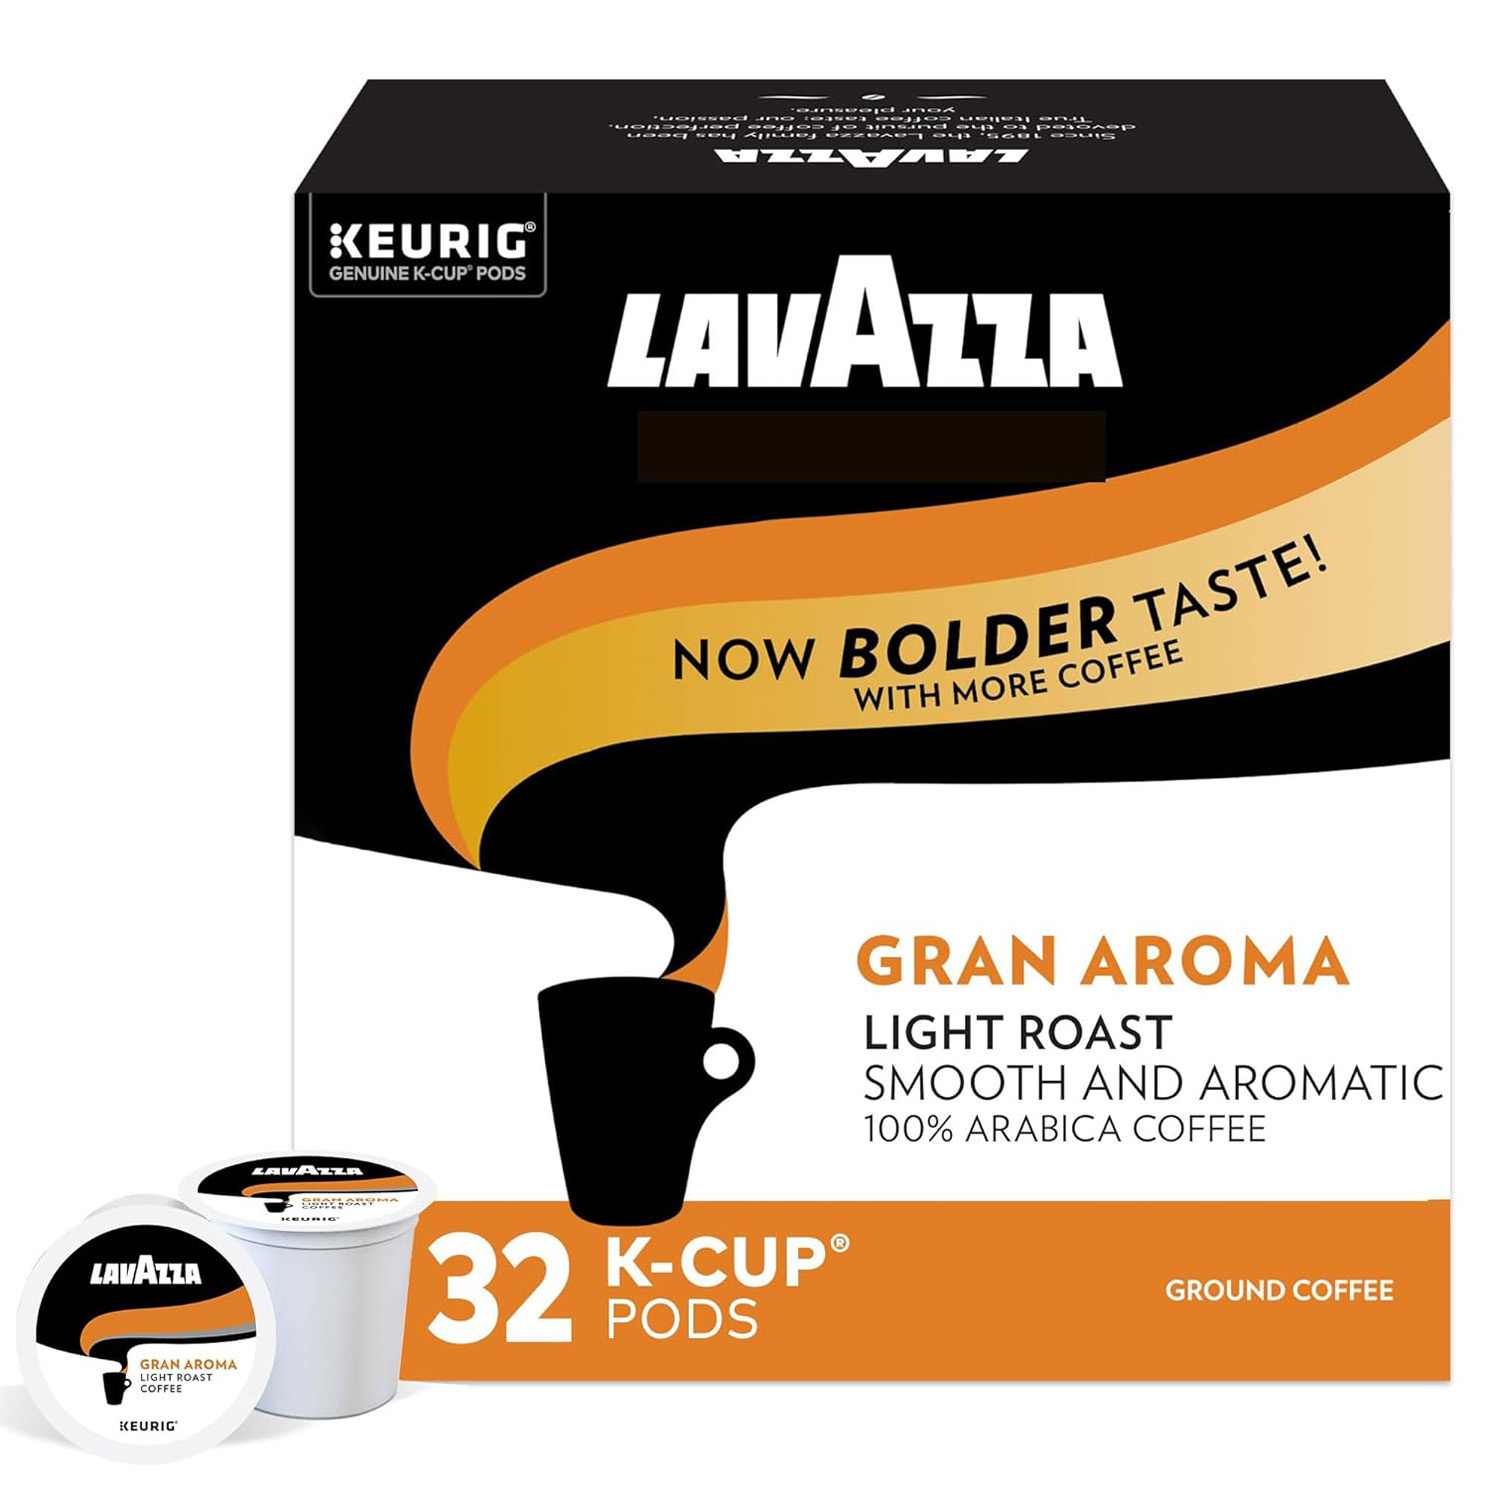 Lavazza Perfetto SingleServe Coffee KCups for Keurig Brewer, Gran Aroma